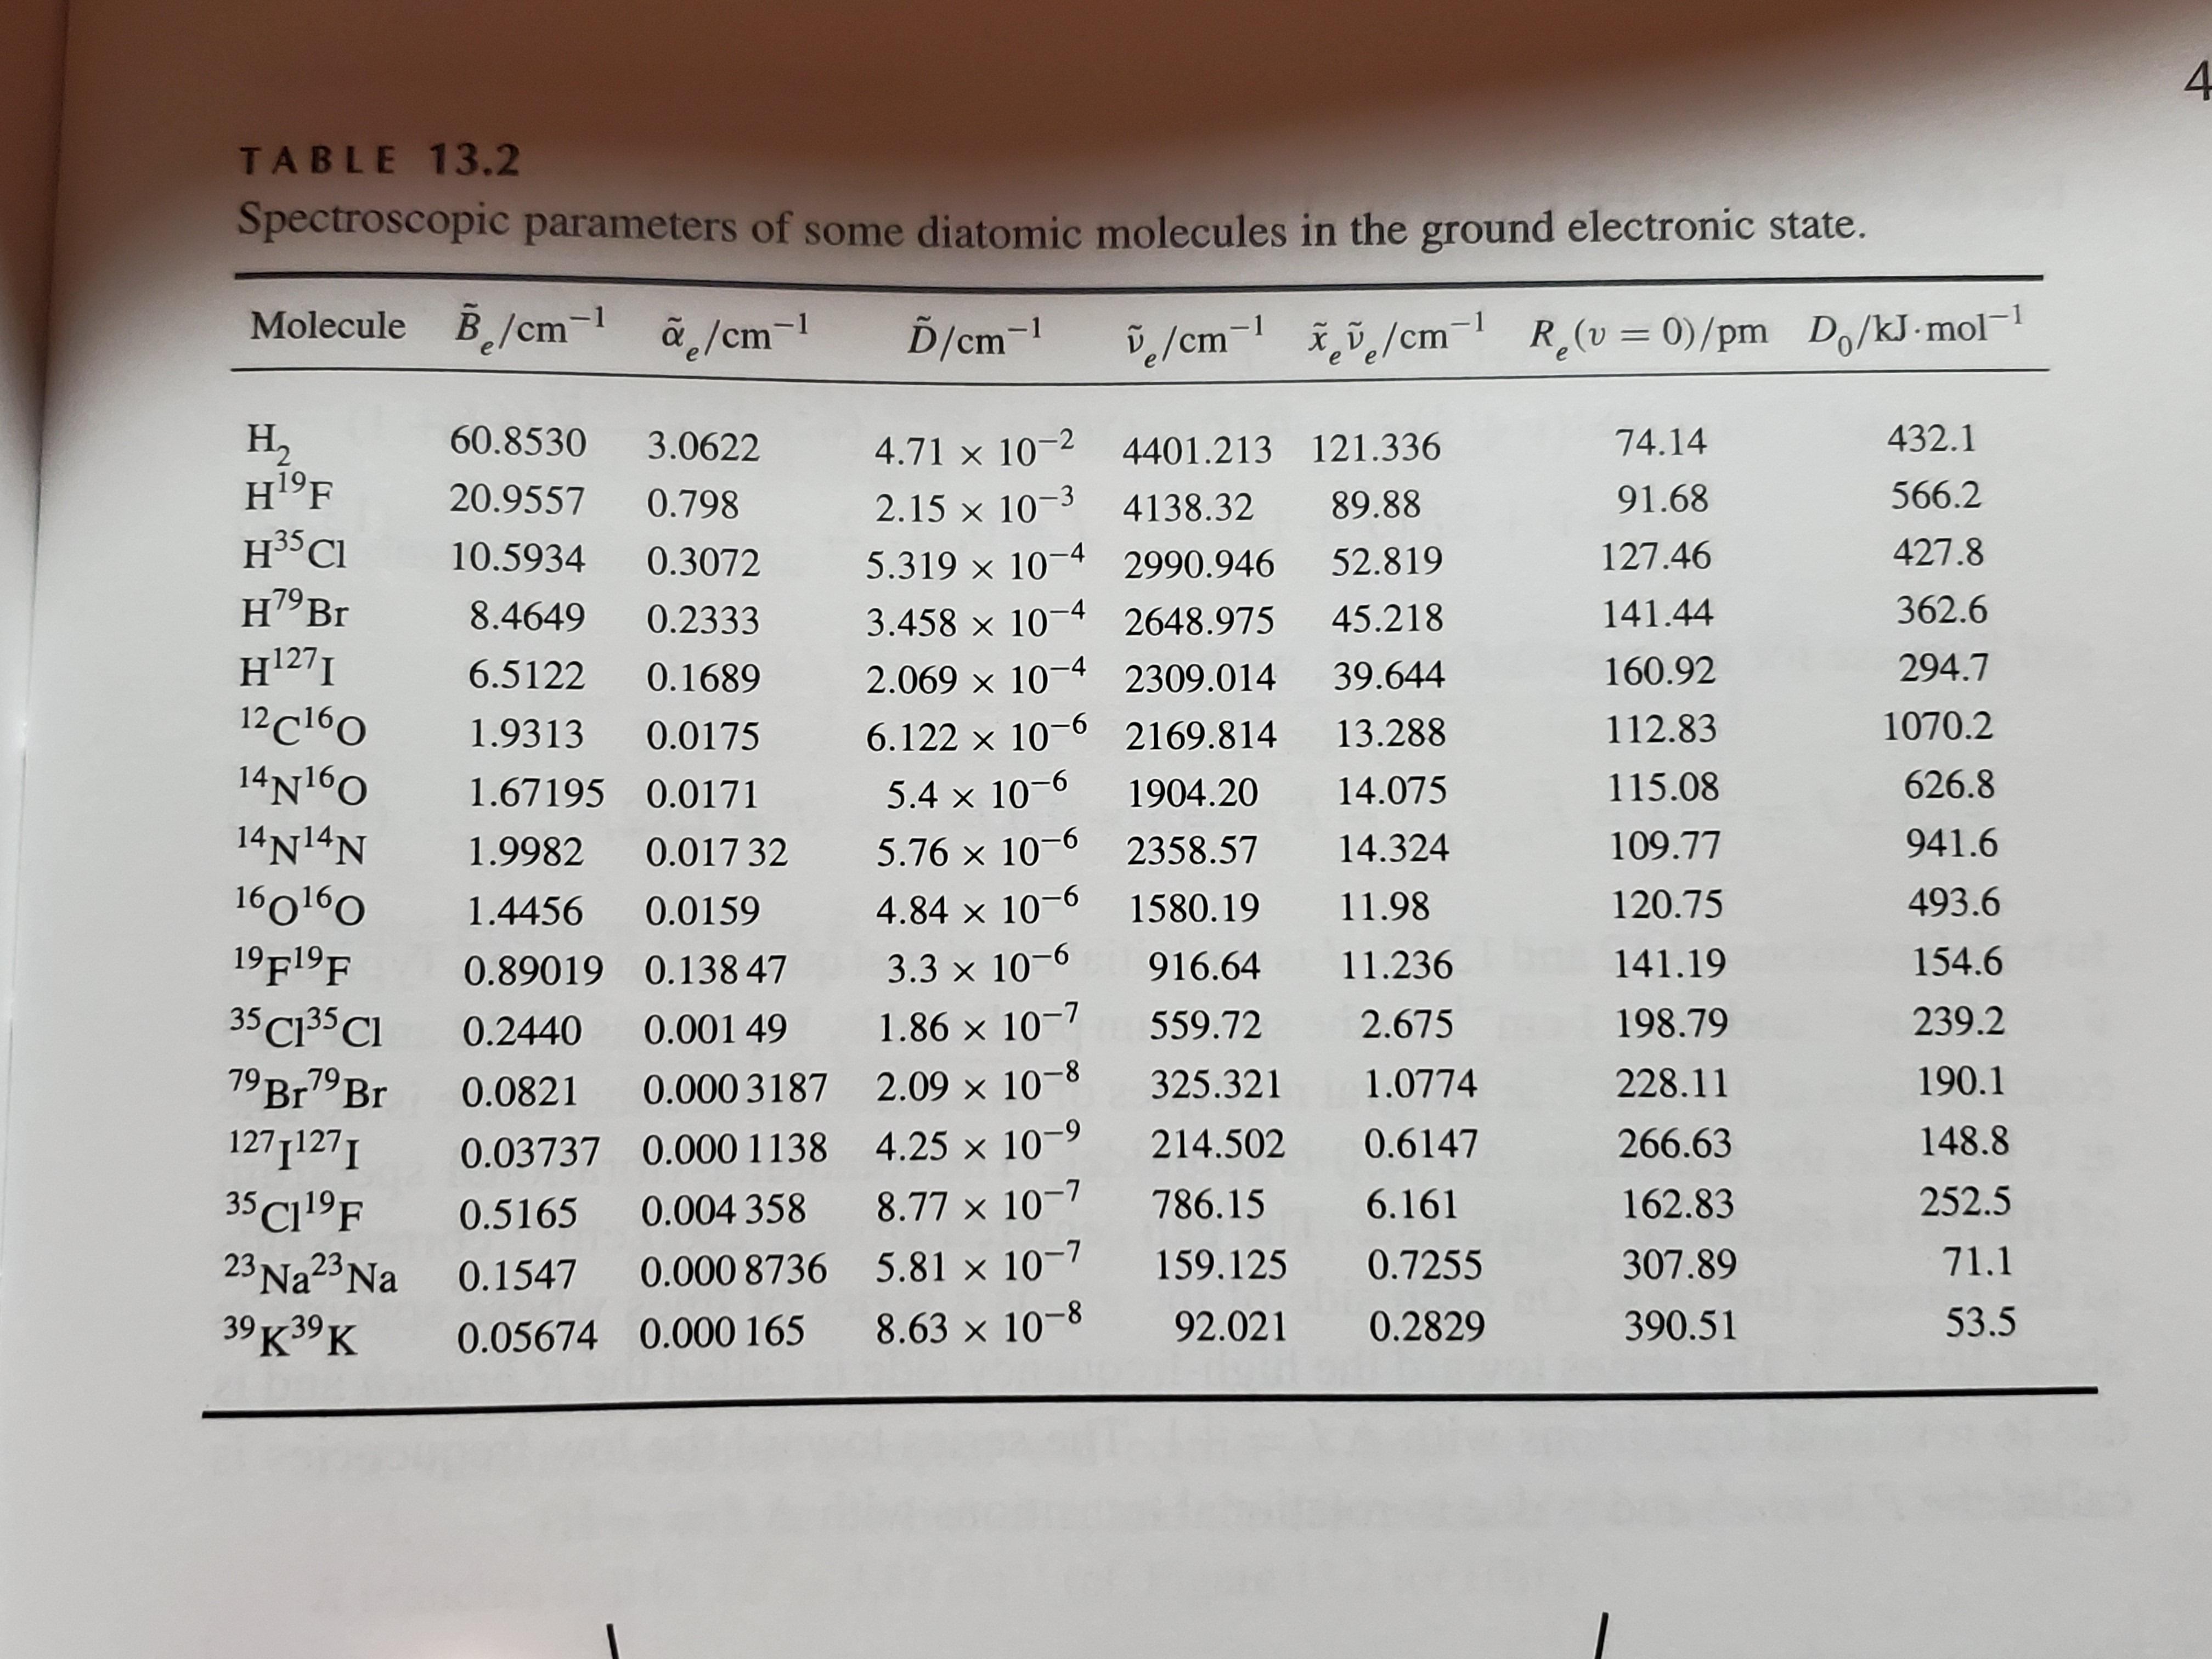 4.
TABLE 13.2
Spectroscopic parameters of some diatomic molecules in the ground electronic state.
Molecule B/cm ã,/cm-
ã /cm-1
D/cm-!
Kve/cm= R(v = 0)/pm Do/kJ-mol-1
De/cm1
432.1
н,
н°F
H3³CI
79B.
60.8530
74.14
3.0622
4.71 x 10-2 4401.213 121.336
566.2
20.9557
91.68
0.798
2.15 x 10-3 4138.32
89.88
427.8
10.5934
127.46
0.3072
5.319 x 10-4 2990.946
52.819
362.6
8.4649
141.44
0.2333
3.458 x 10-4 2648.975
45.218
н1271
294.7
160.92
6.5122
39.644
0.1689
2.069 x 10- 2309.014
12c160
14N160
14N14N
160160
19F1ºF
35 CI35 Cl
1070.2
112.83
6.122 x 10-6 2169.814
1.9313
13.288
0.0175
626.8
115.08
14.075
1.67195 0.0171
5.4 x 10-6
1904.20
941.6
109.77
5.76 x 10-6 2358.57
14.324
1.9982
0.017 32
493.6
120.75
4.84 x 10-6
11.98
1580.19
1.4456
0.0159
154.6
141.19
11.236
916.64
3.3 x 10-6
0.89019 0.138 47
239.2
198.79
2.675
1.86 x 10-7
559.72
0.001 49
0.2440
79 BrBr
190.1
79
228.11
1.0774
0.000 3187 2.09 × 10-8
325.321
0.0821
0.03737 0.000 1138 4.25 x 10-9
0.5165 0.004 358 8.77 x 10-7
148.8
266.63
[127ן127
35 C1 ºF
0.6147
214.502
252.5
786.15
6.161
162.83
71.1
0.7255
307.89
23 Na23 Na
159.125
0.000 8736 5.81 × 10-7
0.1547
39 к 39К
53.5
8.63 x 10-8
92.021
0.2829
390.51
0.05674 0.000 165
